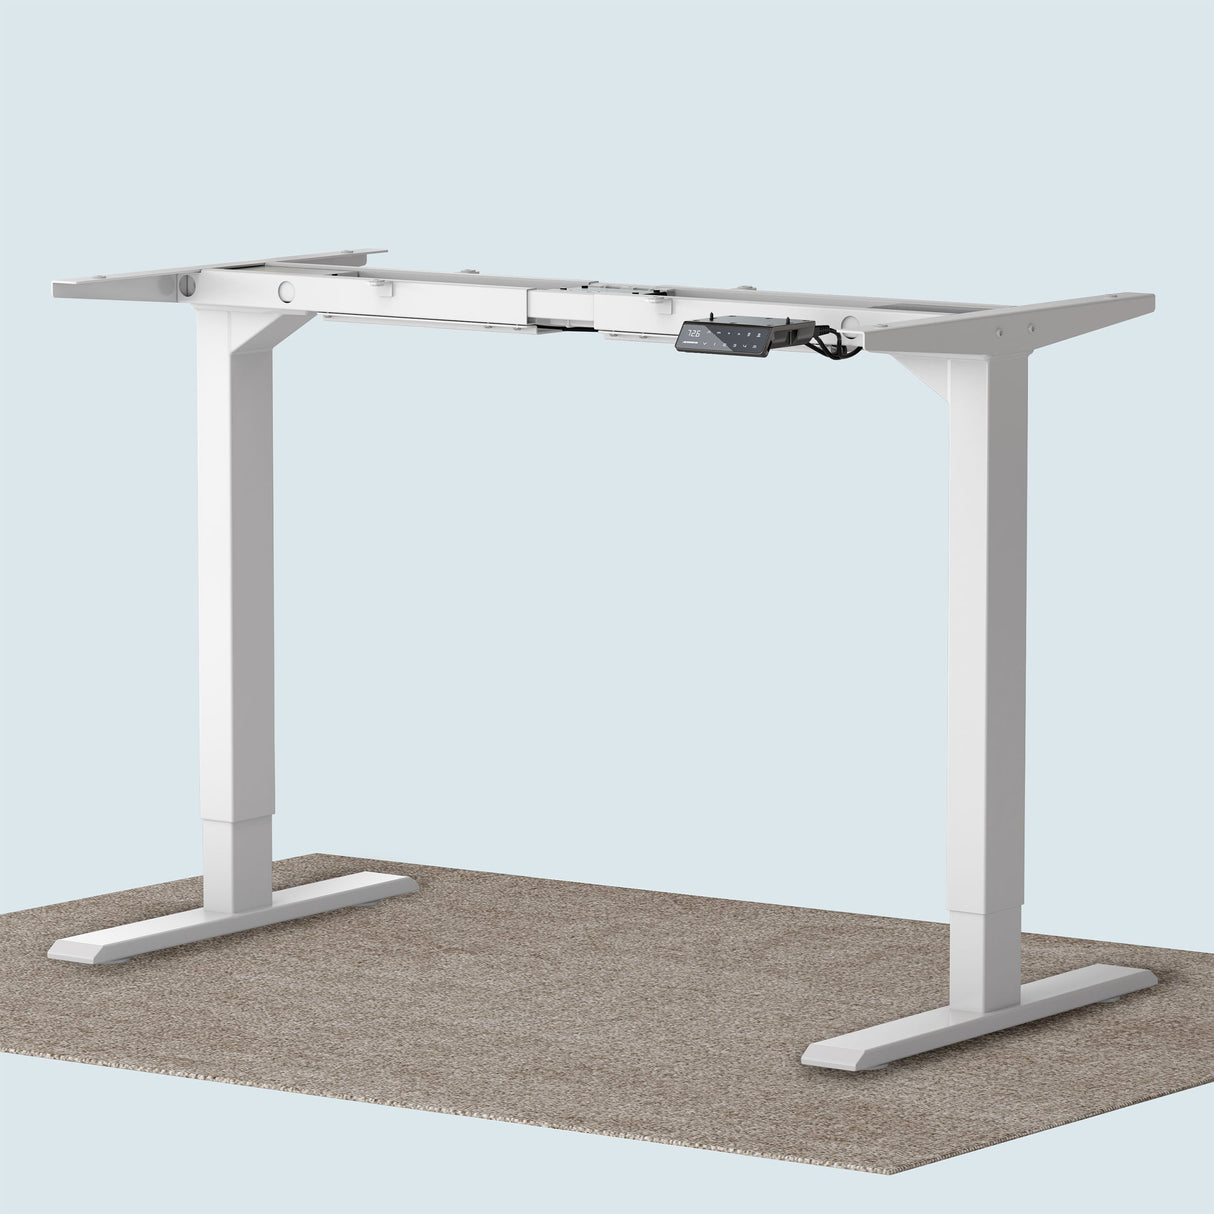 Maidesite T2 Pro electric height adjustable desk frame white